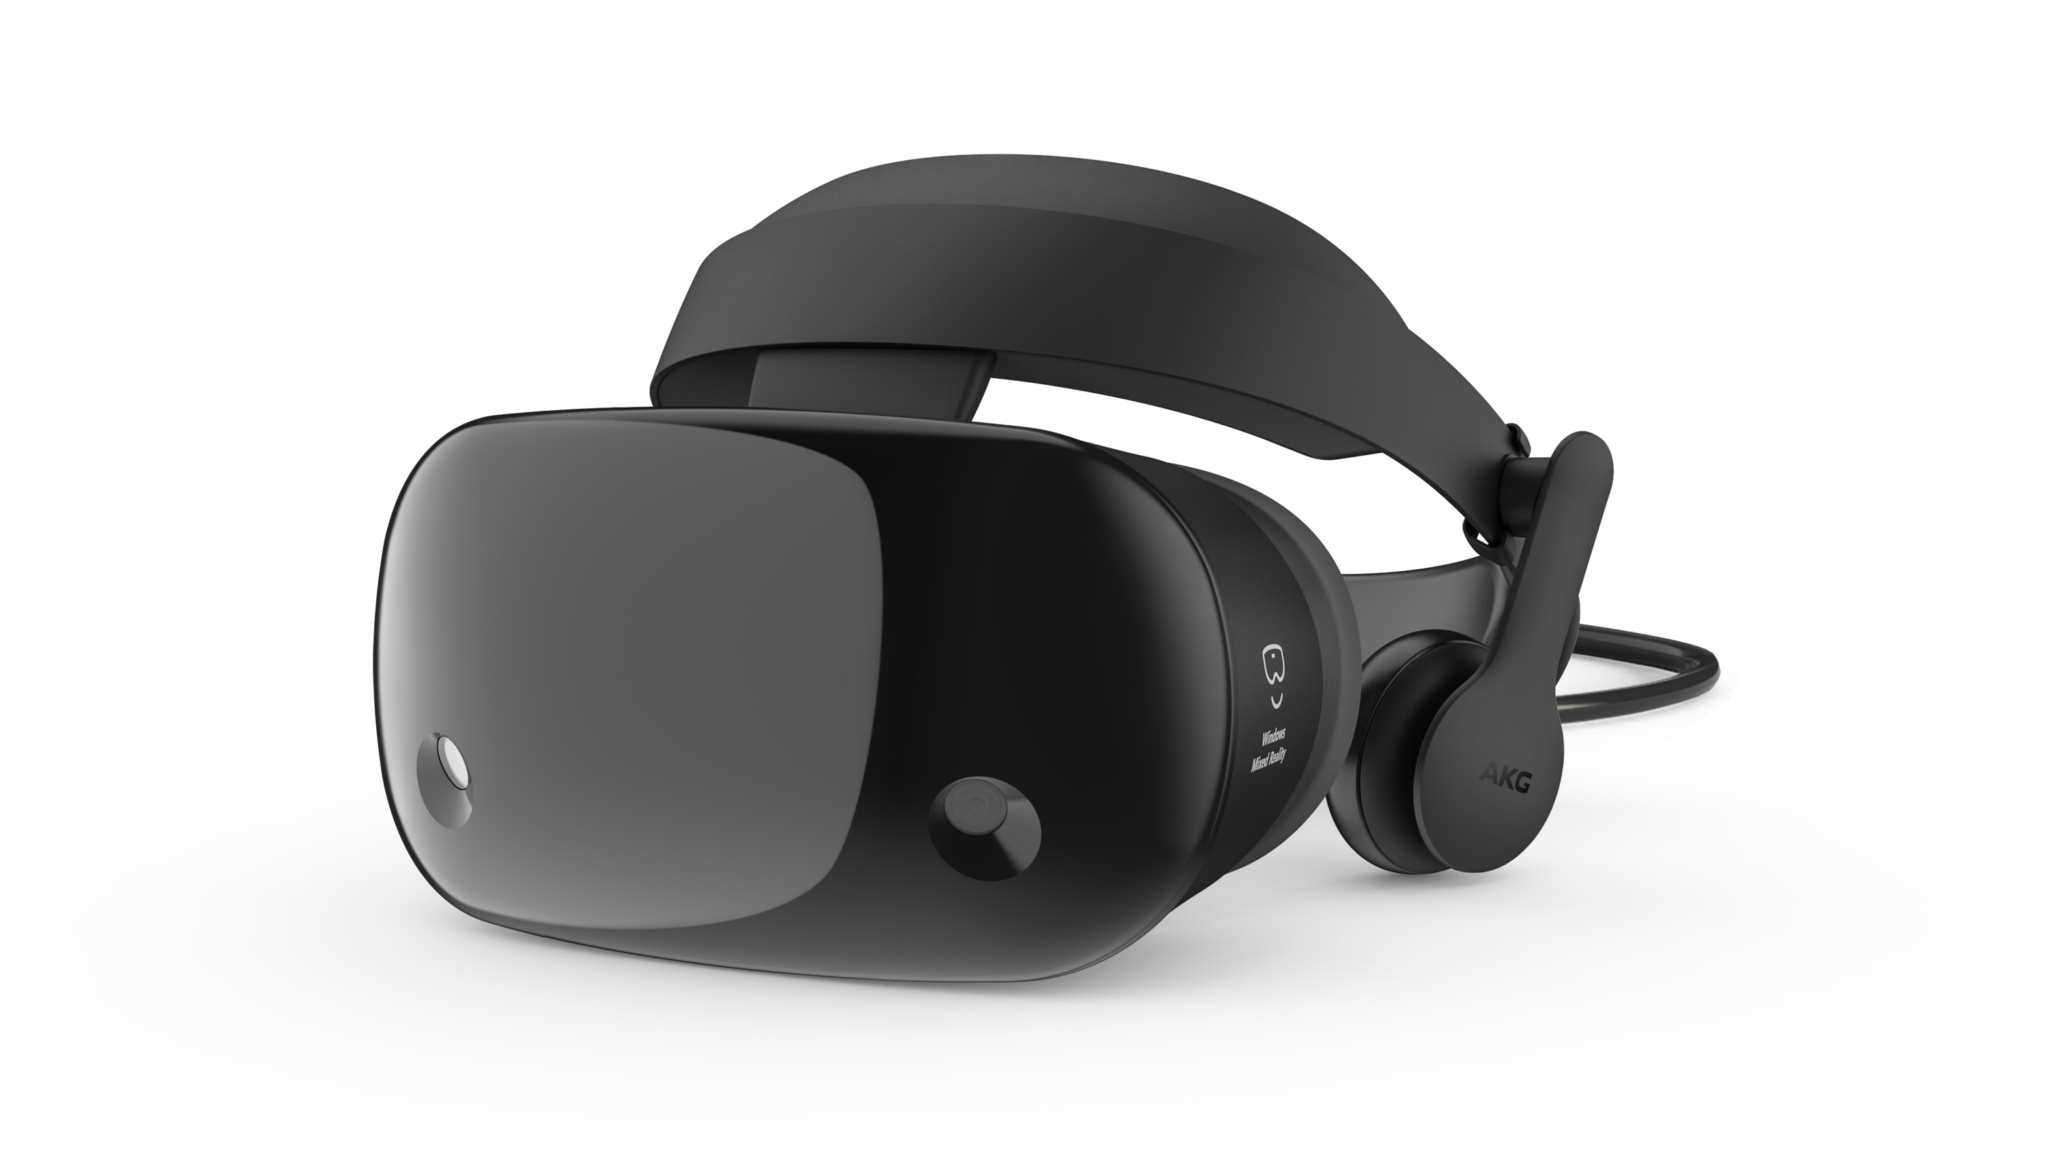 How to pre-order your Windows Mixed Reality headset